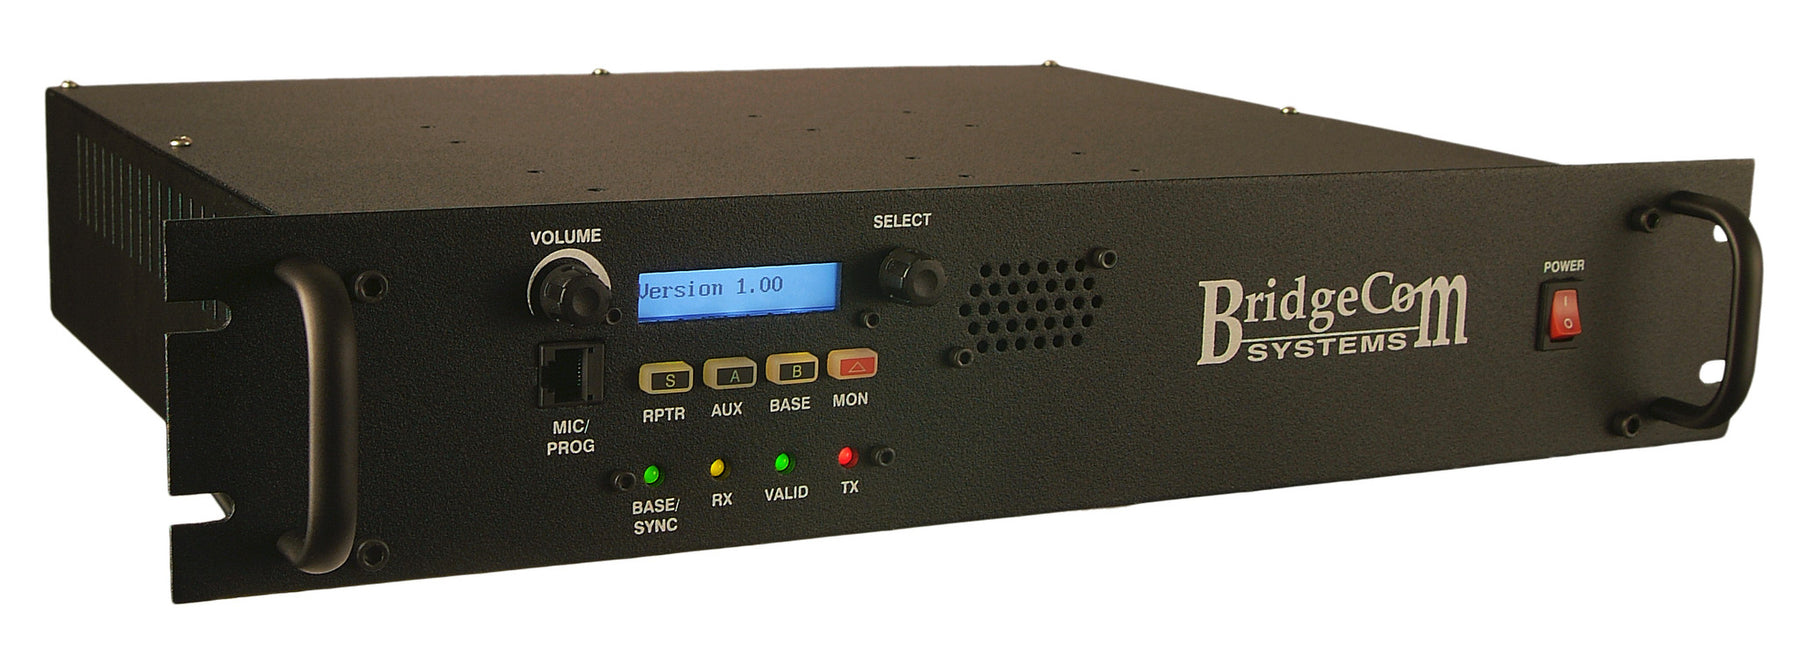 BCR-220 repeater Very Impressed